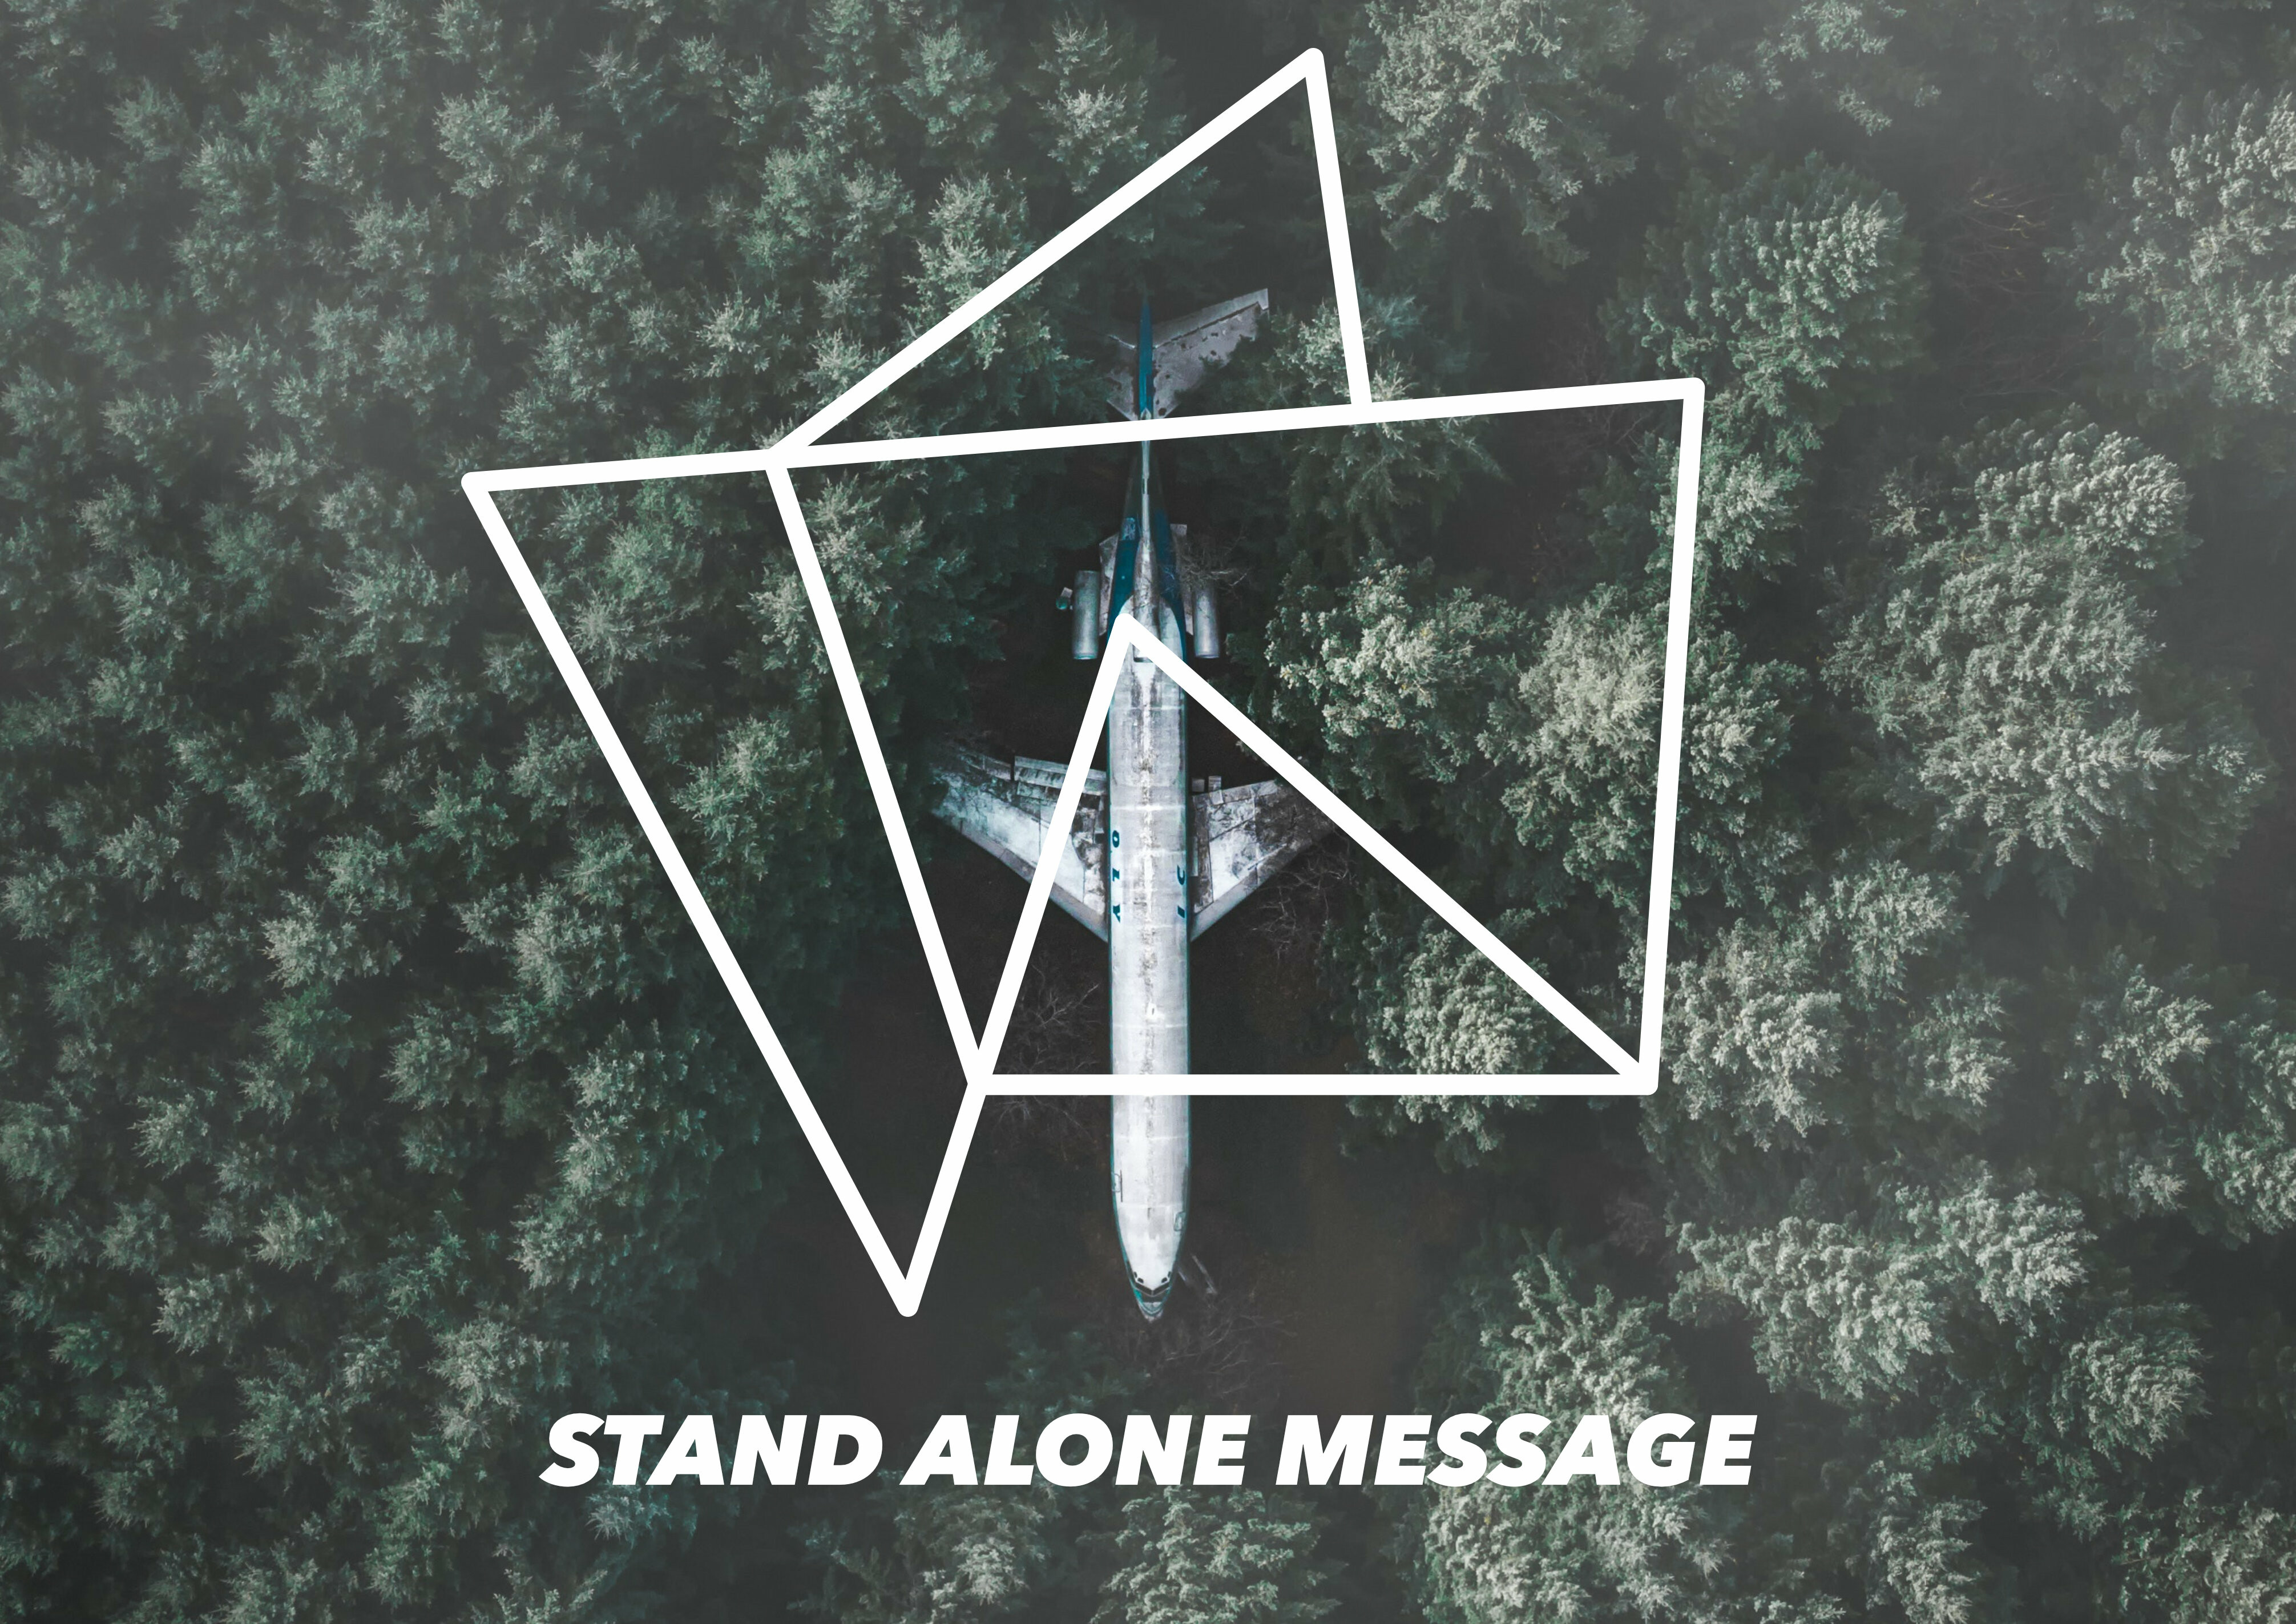 Stand alone message